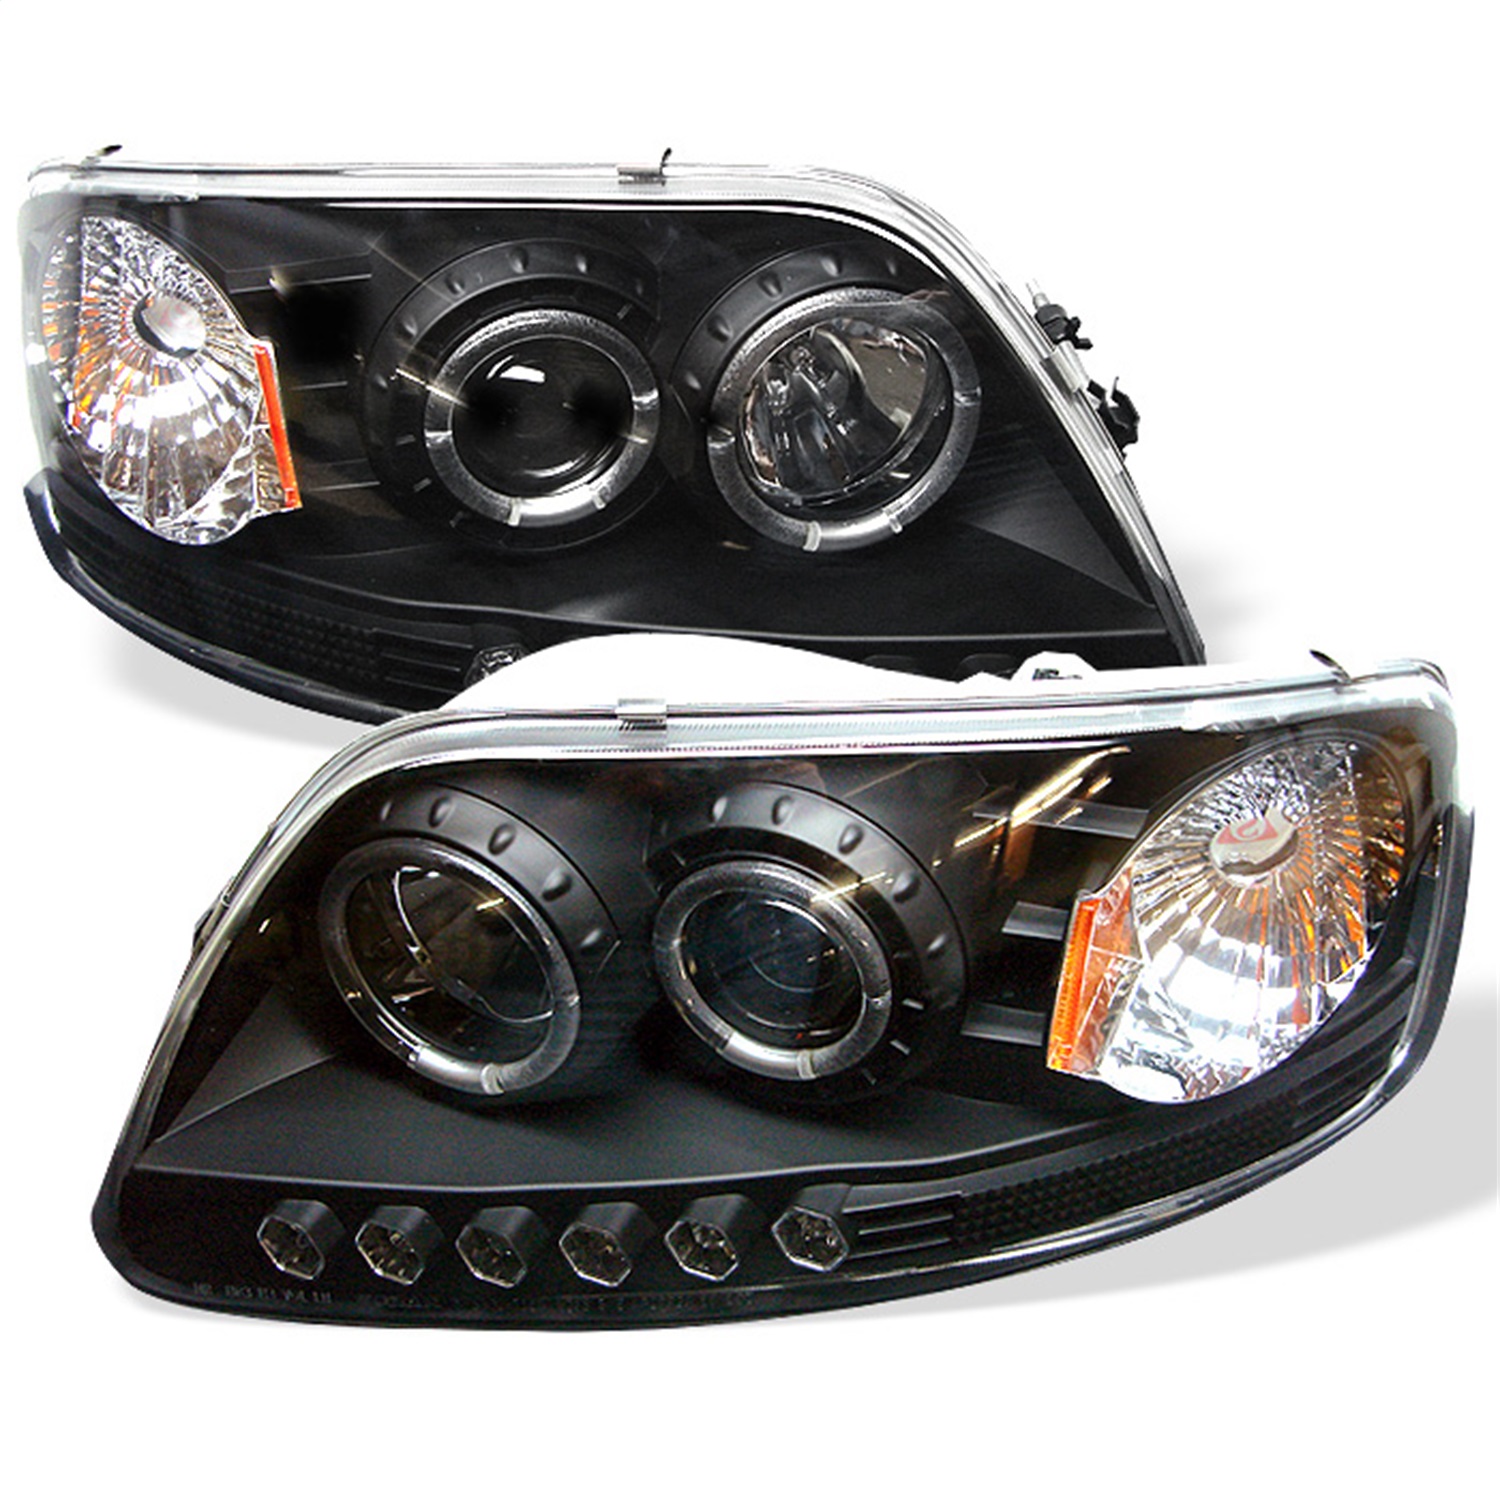 Spyder Auto 5010261 Halo LED Projector Headlights Fits 97-03 Expedition F-150